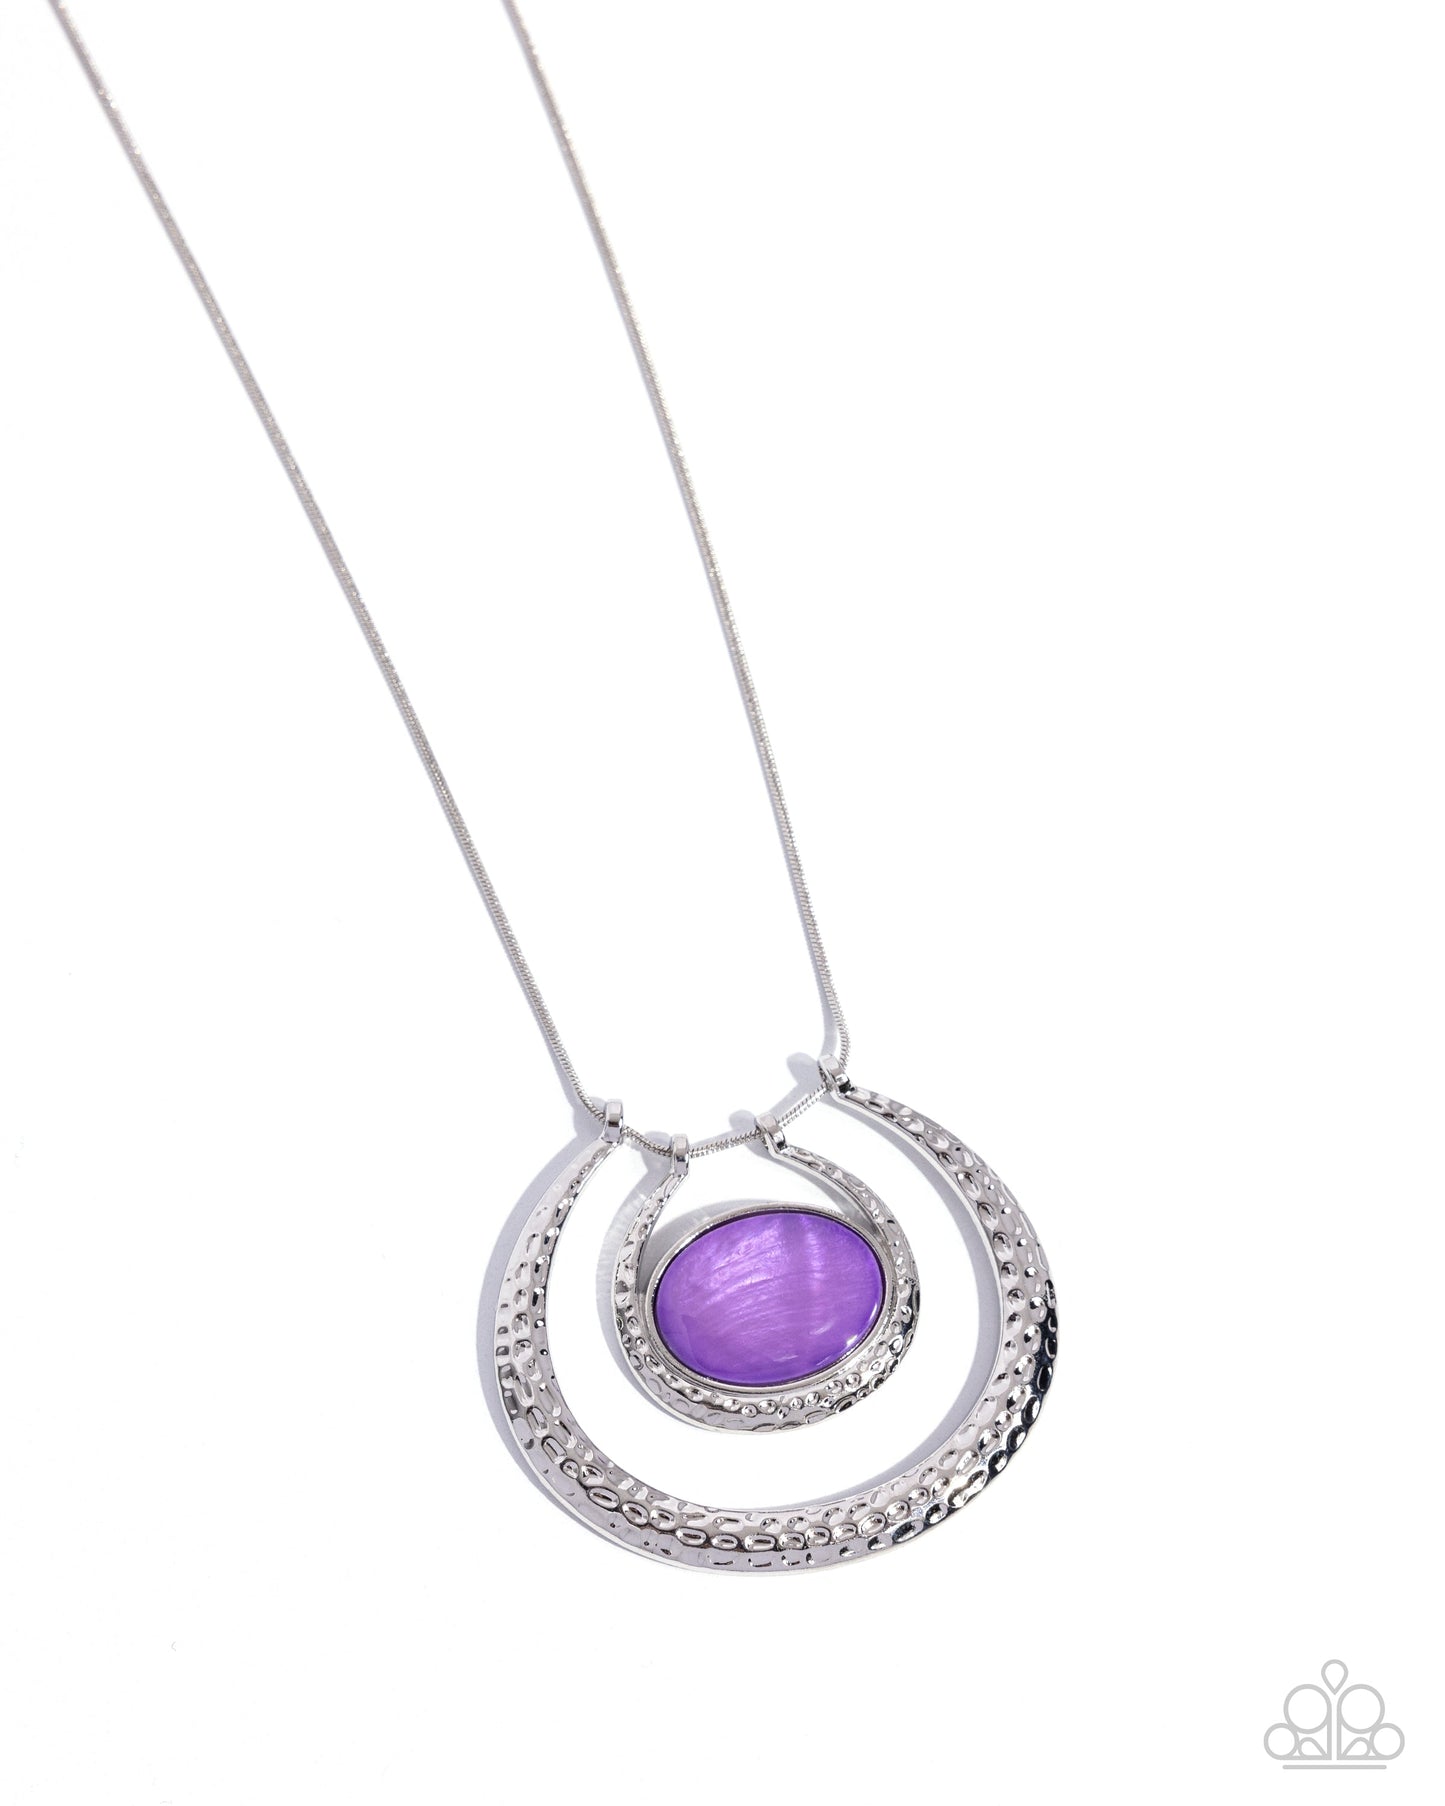 If the HORSESHOE Fits - Purple Necklace - Paparazzi Accessories - Encased in a sleek silver frame, an oval lavender shell rests horizontally at the bottom of a curved silver hammered bar, creating a half moon frame at the bottom of a sleek silver snake chain. A larger, curved, half moon frame with a hammered sheen layers below the shell-lined smaller frame for additional eye-catching detail.